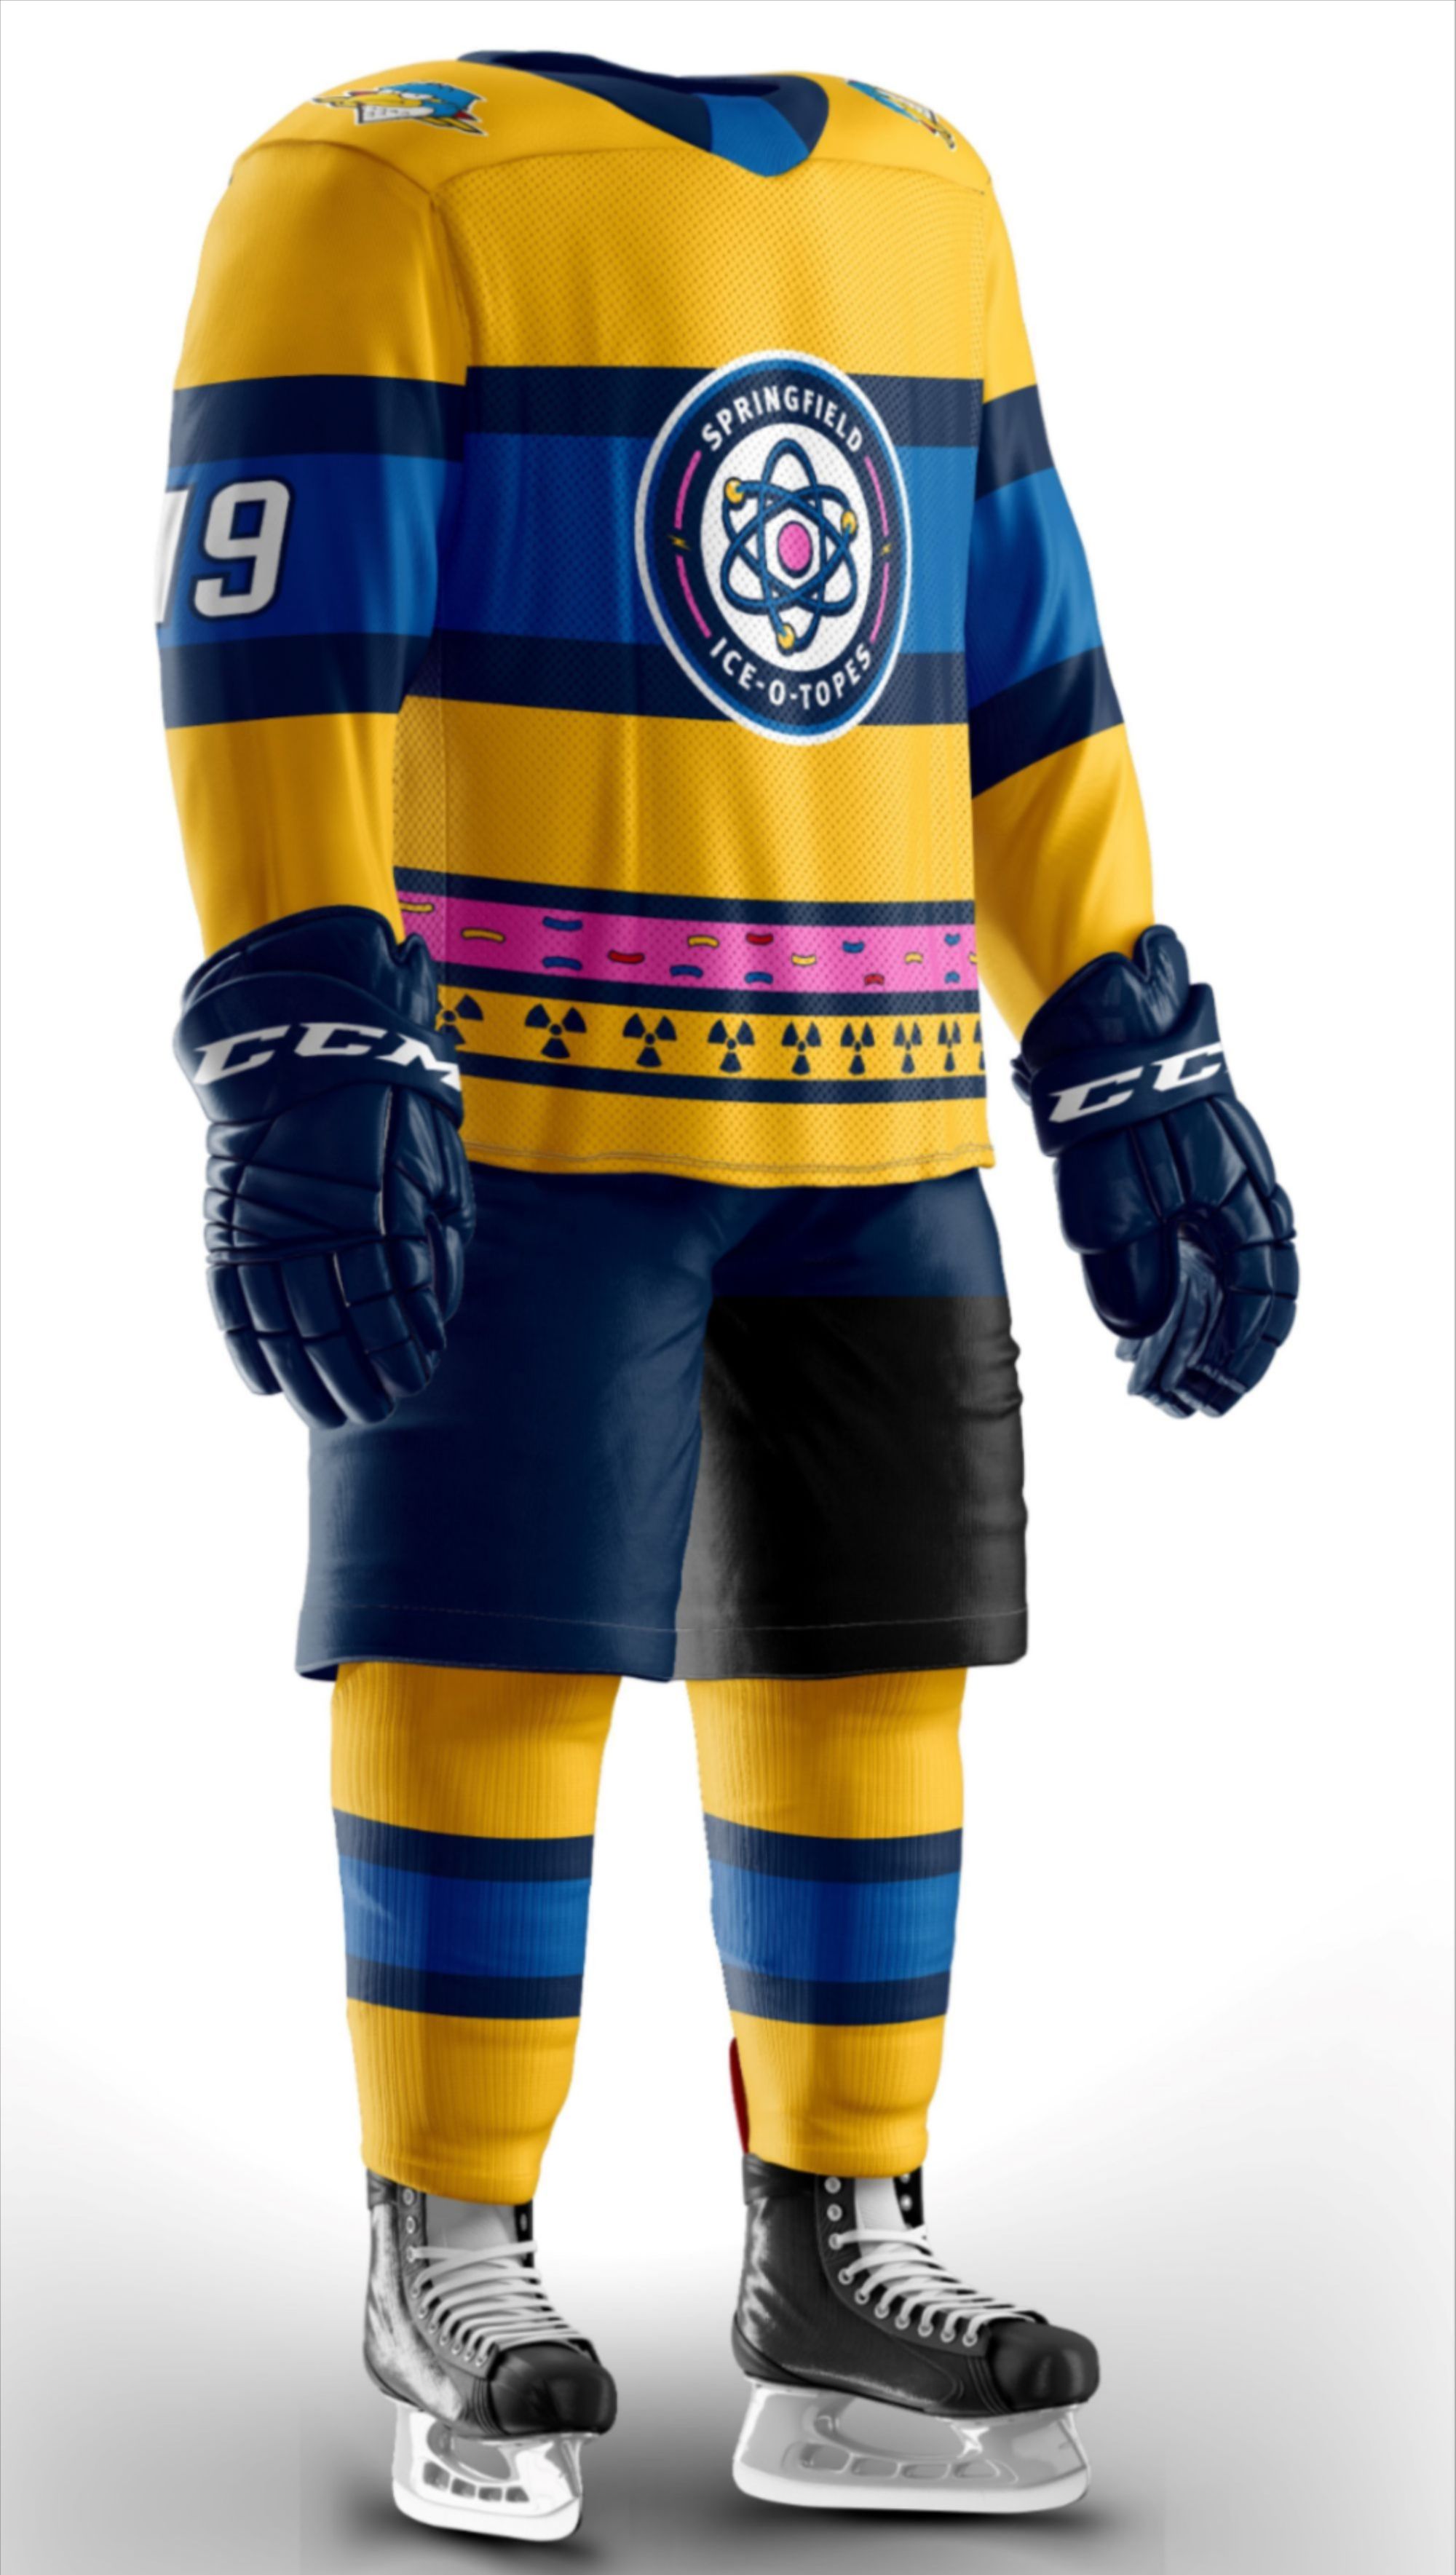 Ice-O-Topes Jersey Design  Attention all 𝙘𝙧𝙤𝙢𝙪𝙡𝙚𝙣𝙩